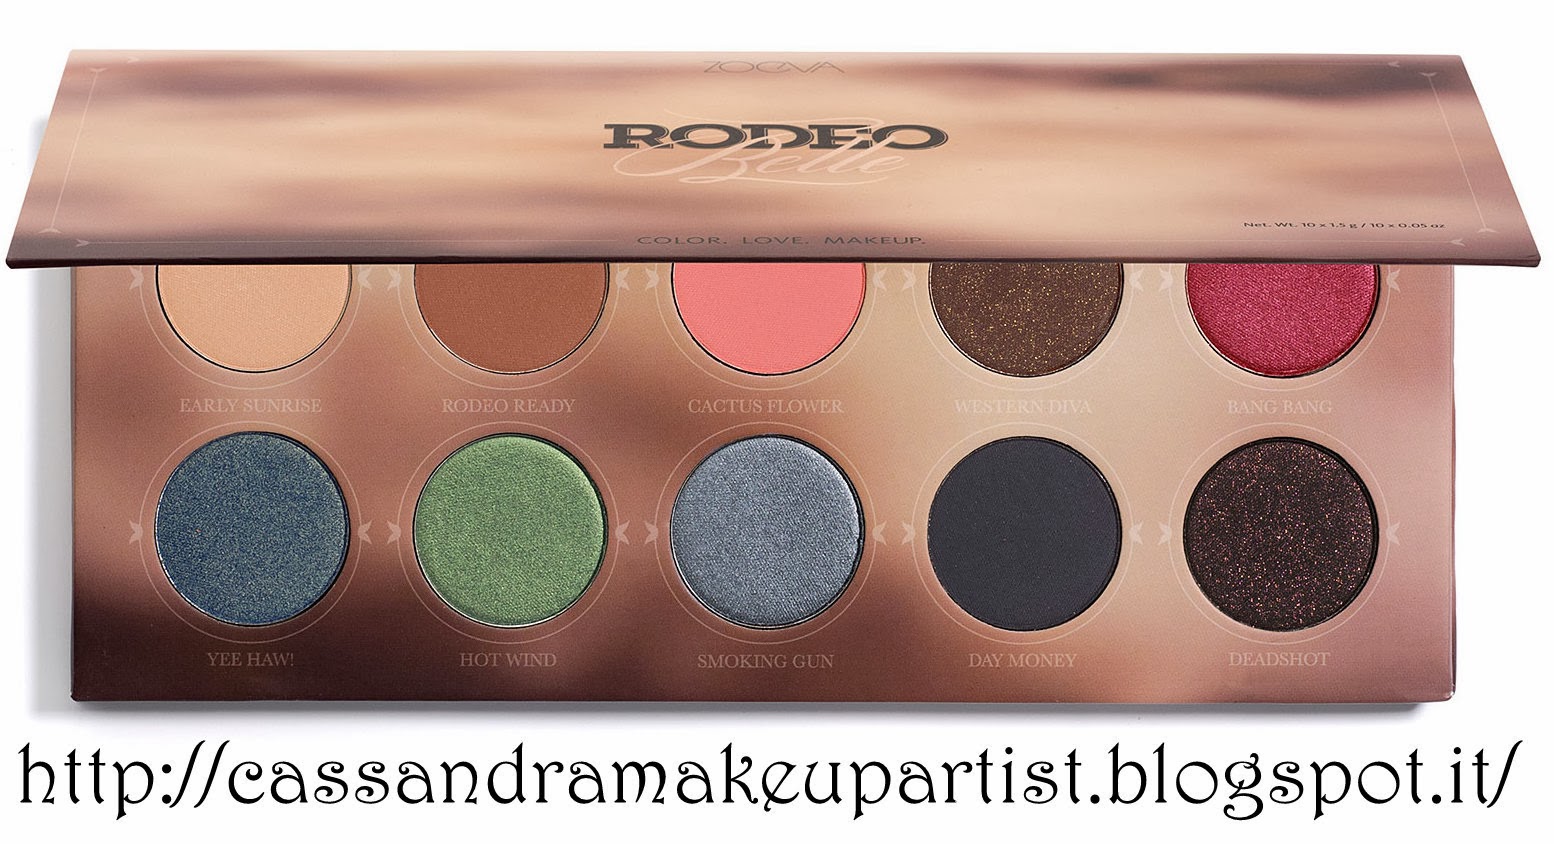 ZOEVA - Nuove Palette -  new palettes - INCI - Pot - 2014 - price -  Naturally Yours  - Rodeo Belle  - Love is a Story  - Retro Future